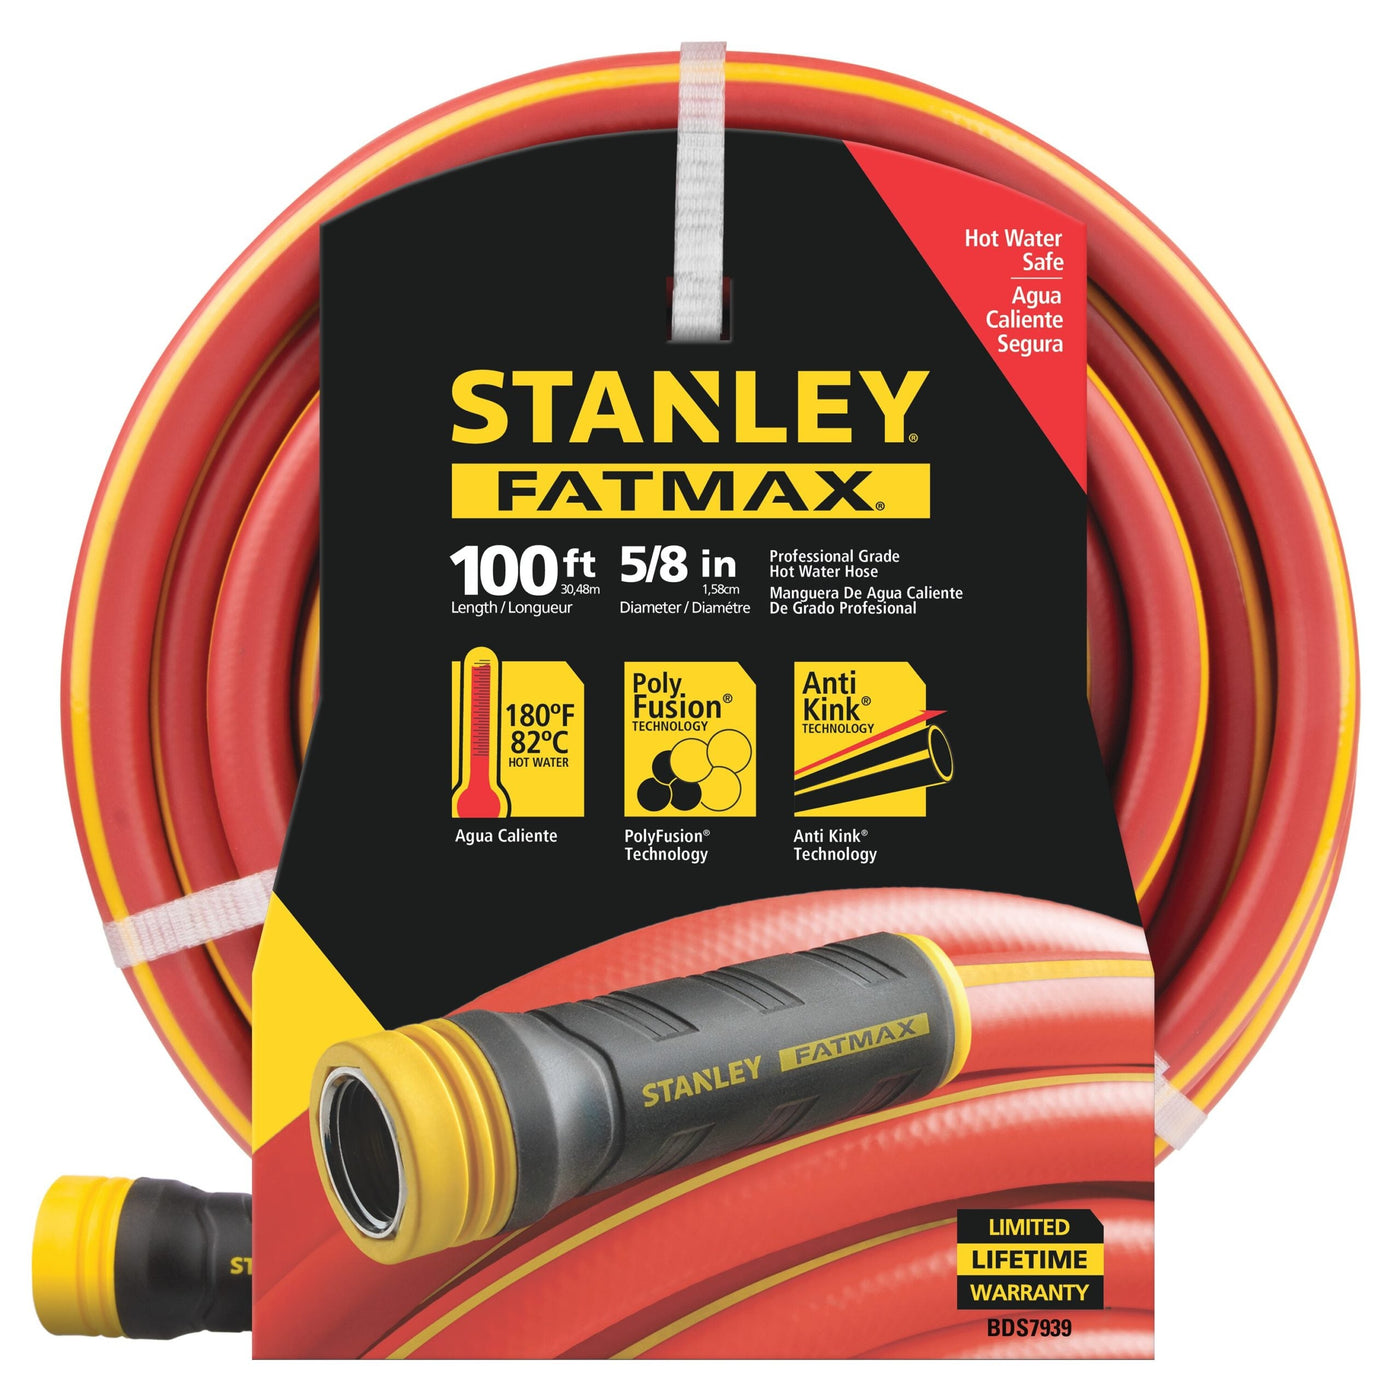 5/8 in. FATMAX® Polyfusion® Hot Water Hose